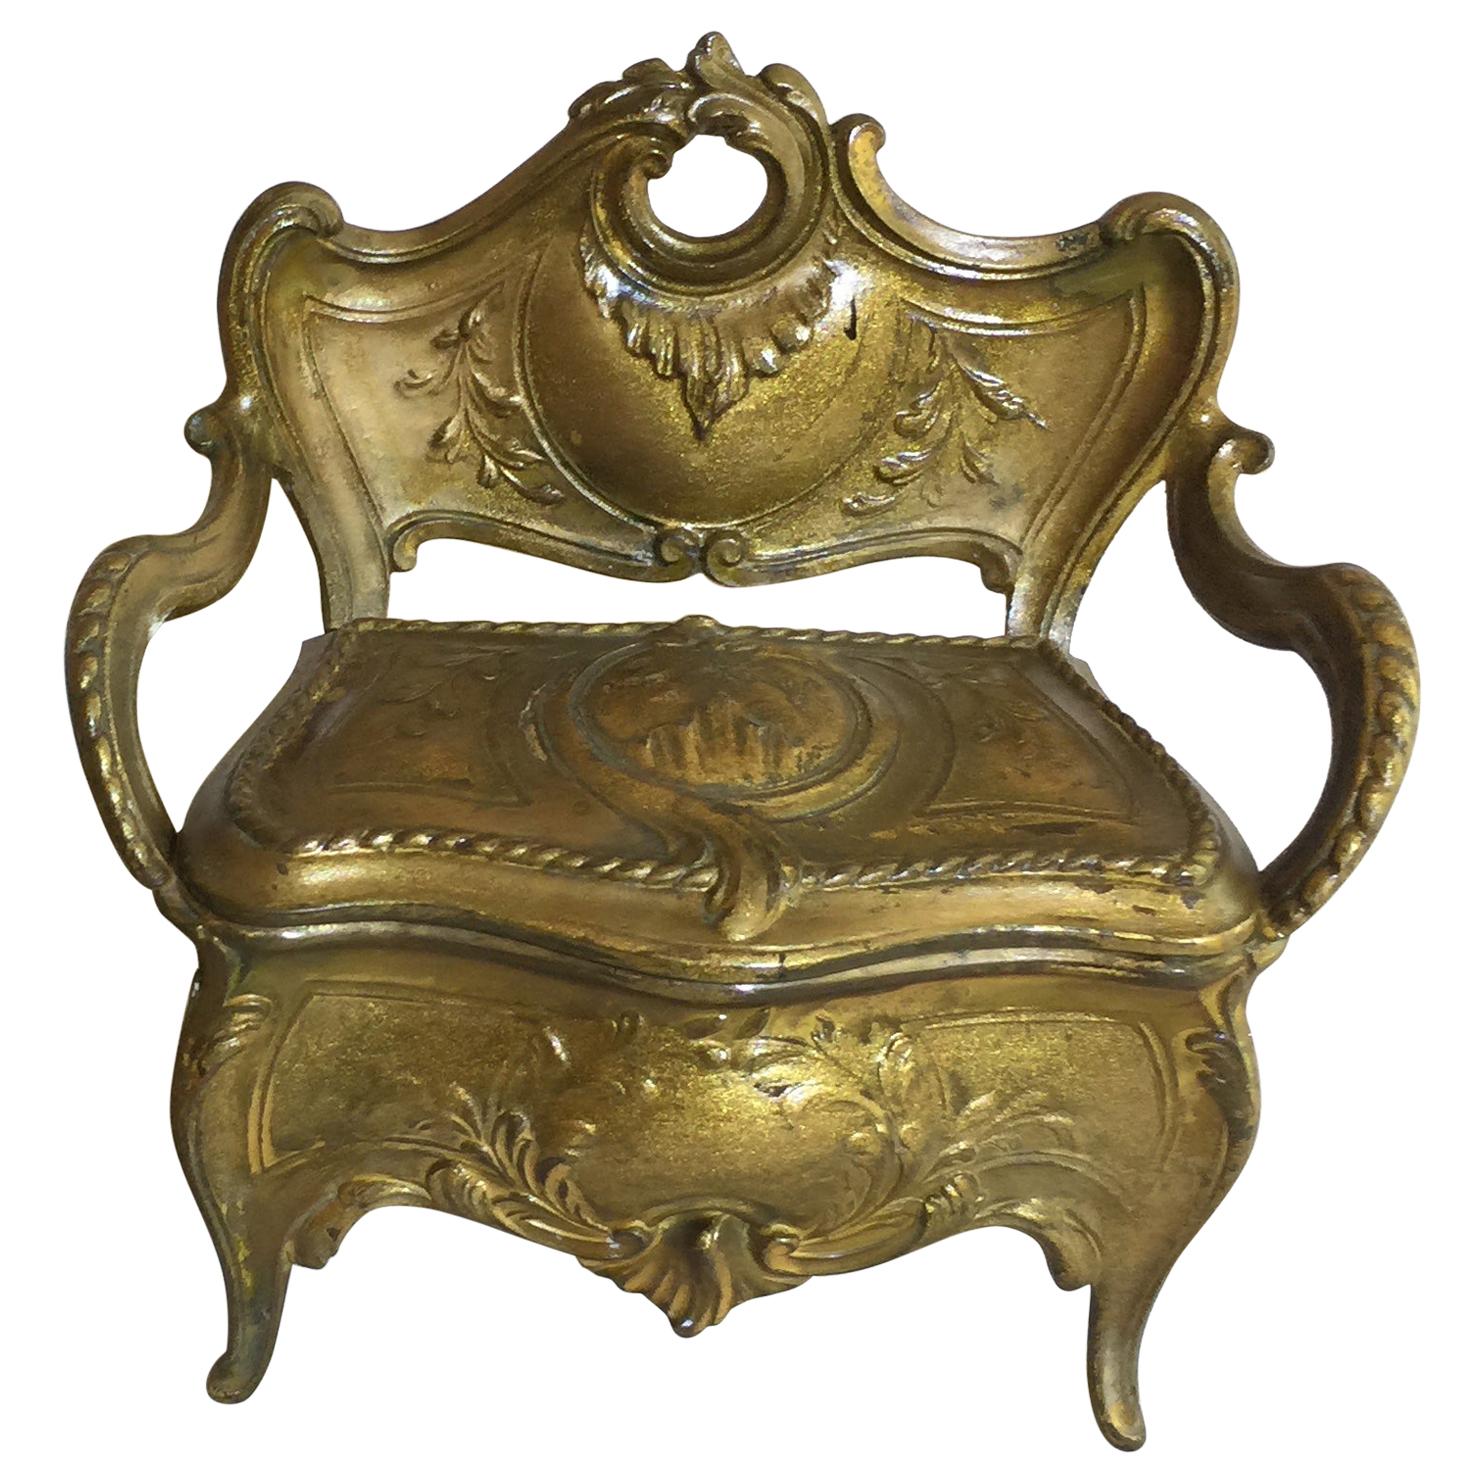 Unusual French Antique Mini Jewelry Box in the Form of a Loveseat, Gilt Metal